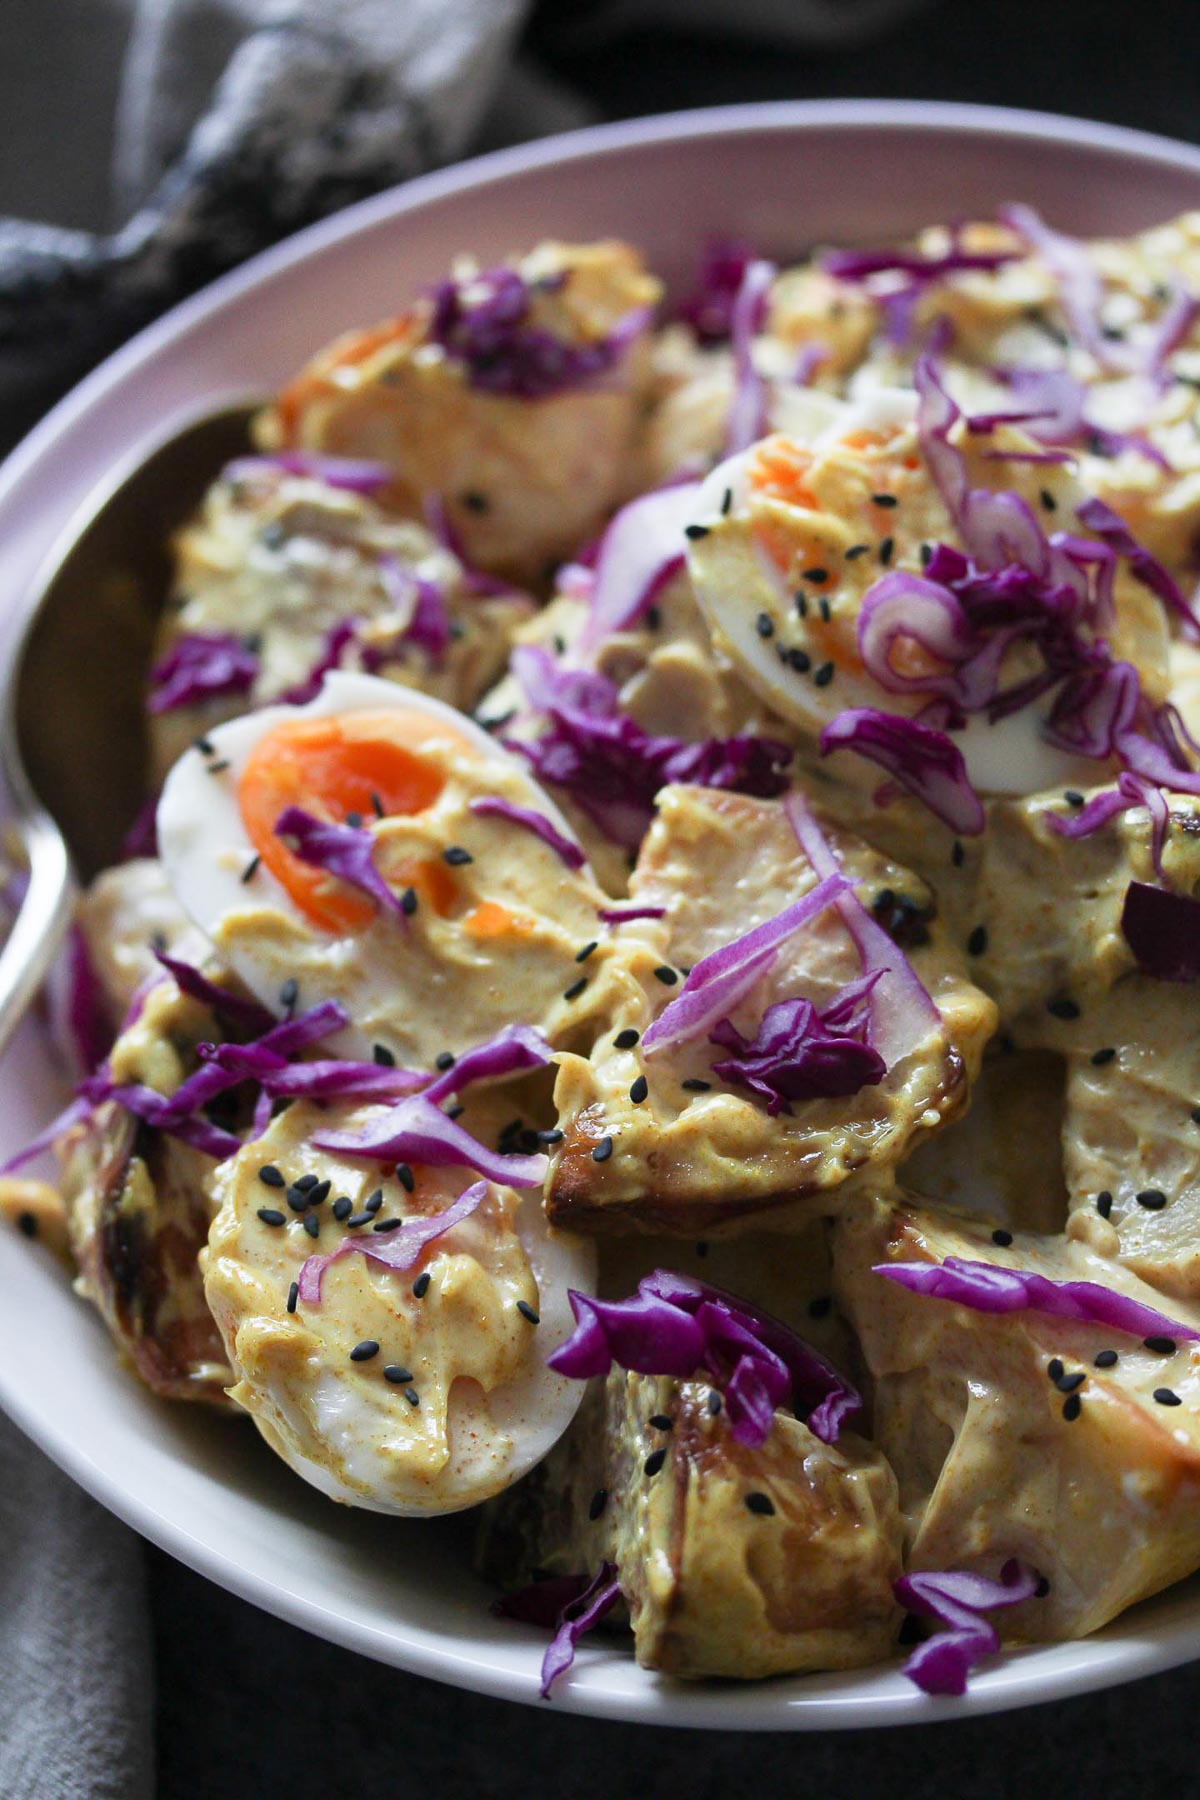 Japanese Curried Potato and Egg Salad, garnished with red cabbage, black sesame seeds and served in a bowl